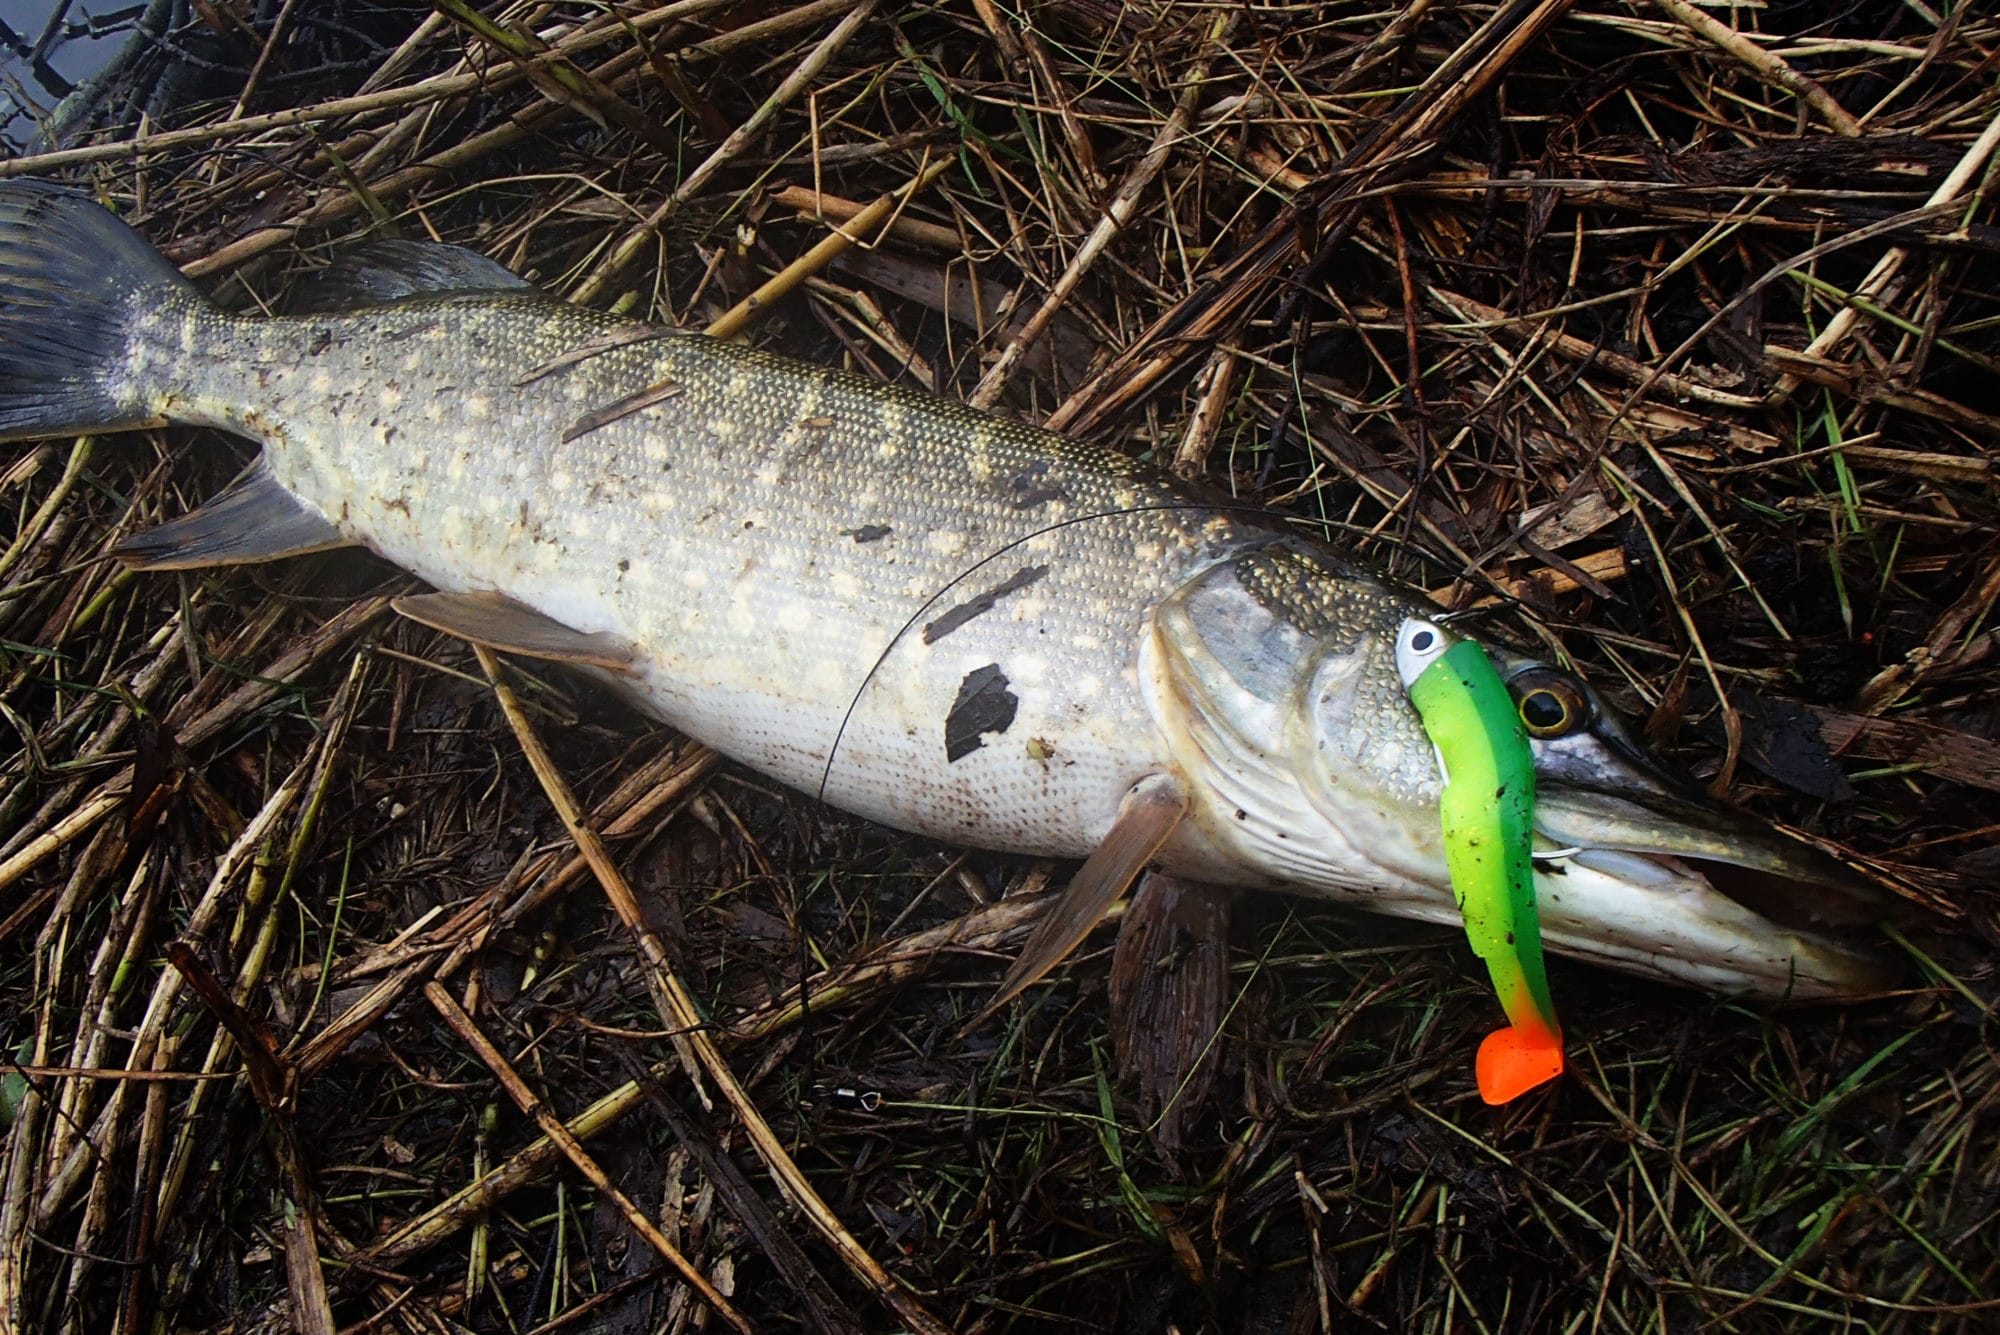 Weed less soft plastics land the pike and breaks the Cabin Fever